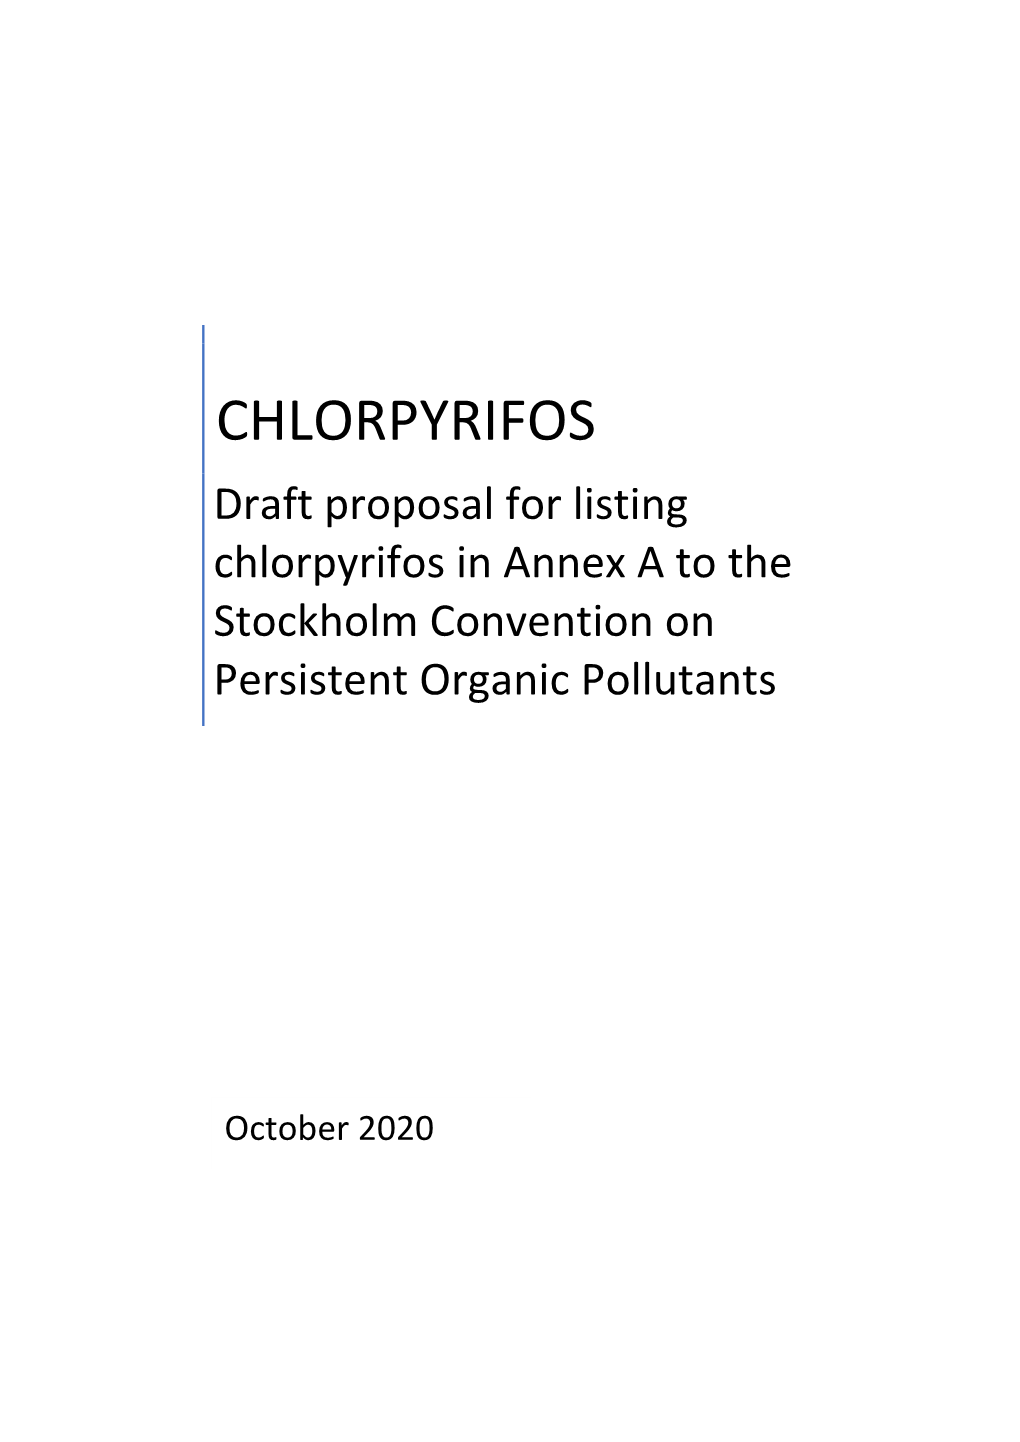 CHLORPYRIFOS Draft Proposal for Listing Chlorpyrifos in Annex a to the Stockholm Convention on Persistent Organic Pollutants